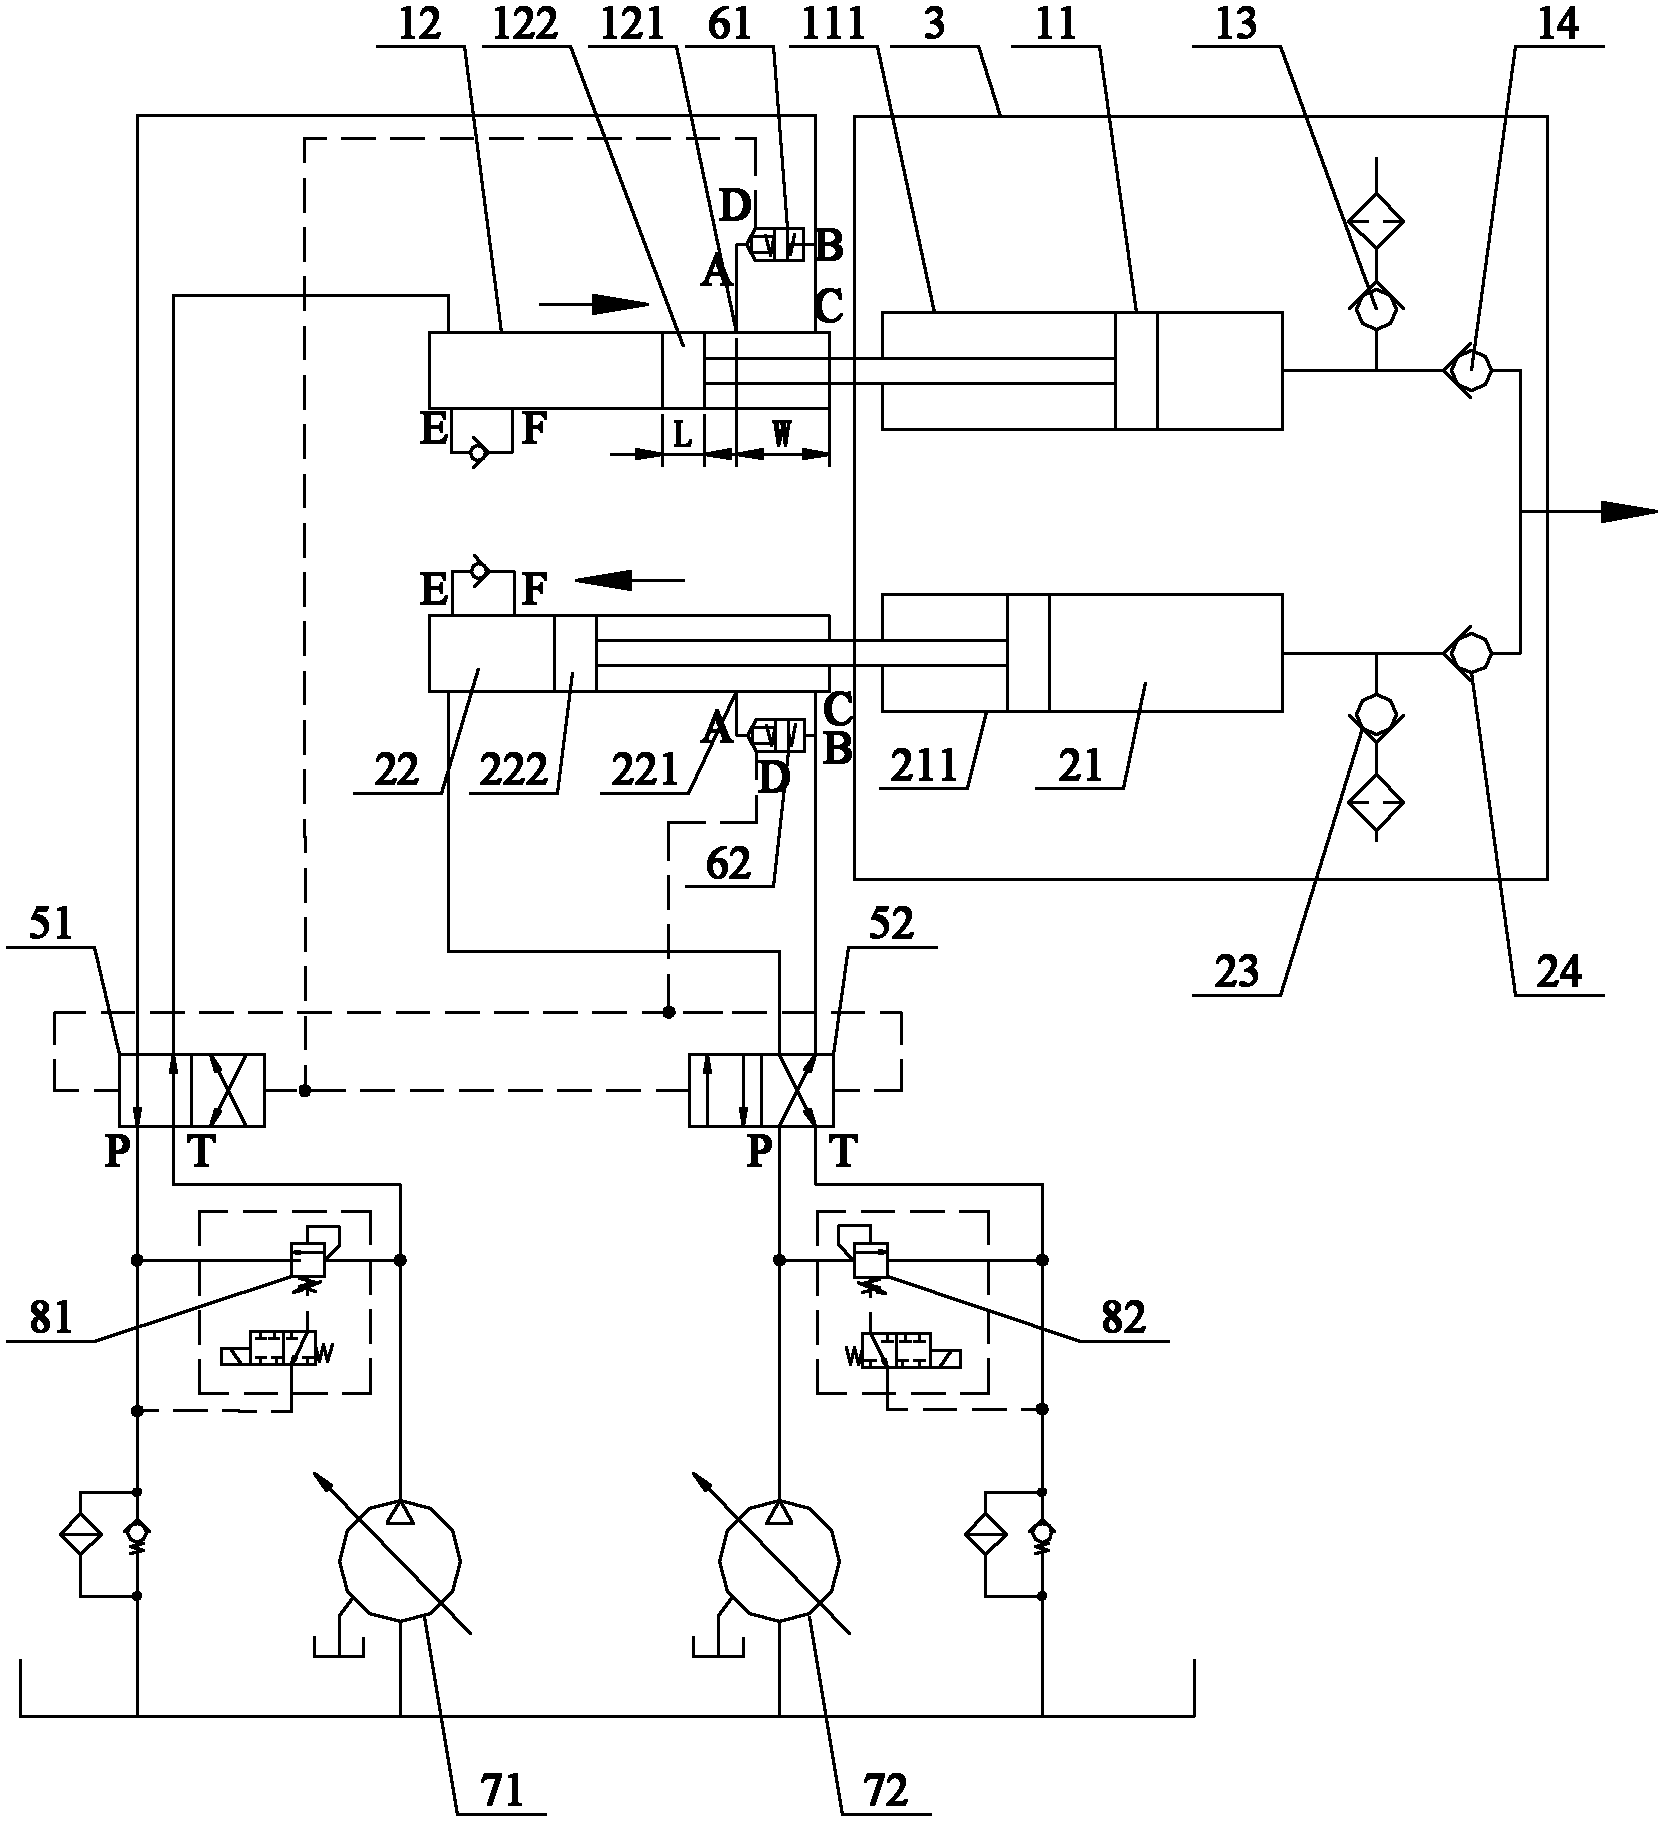 Plunger water pump and liquid control system thereof